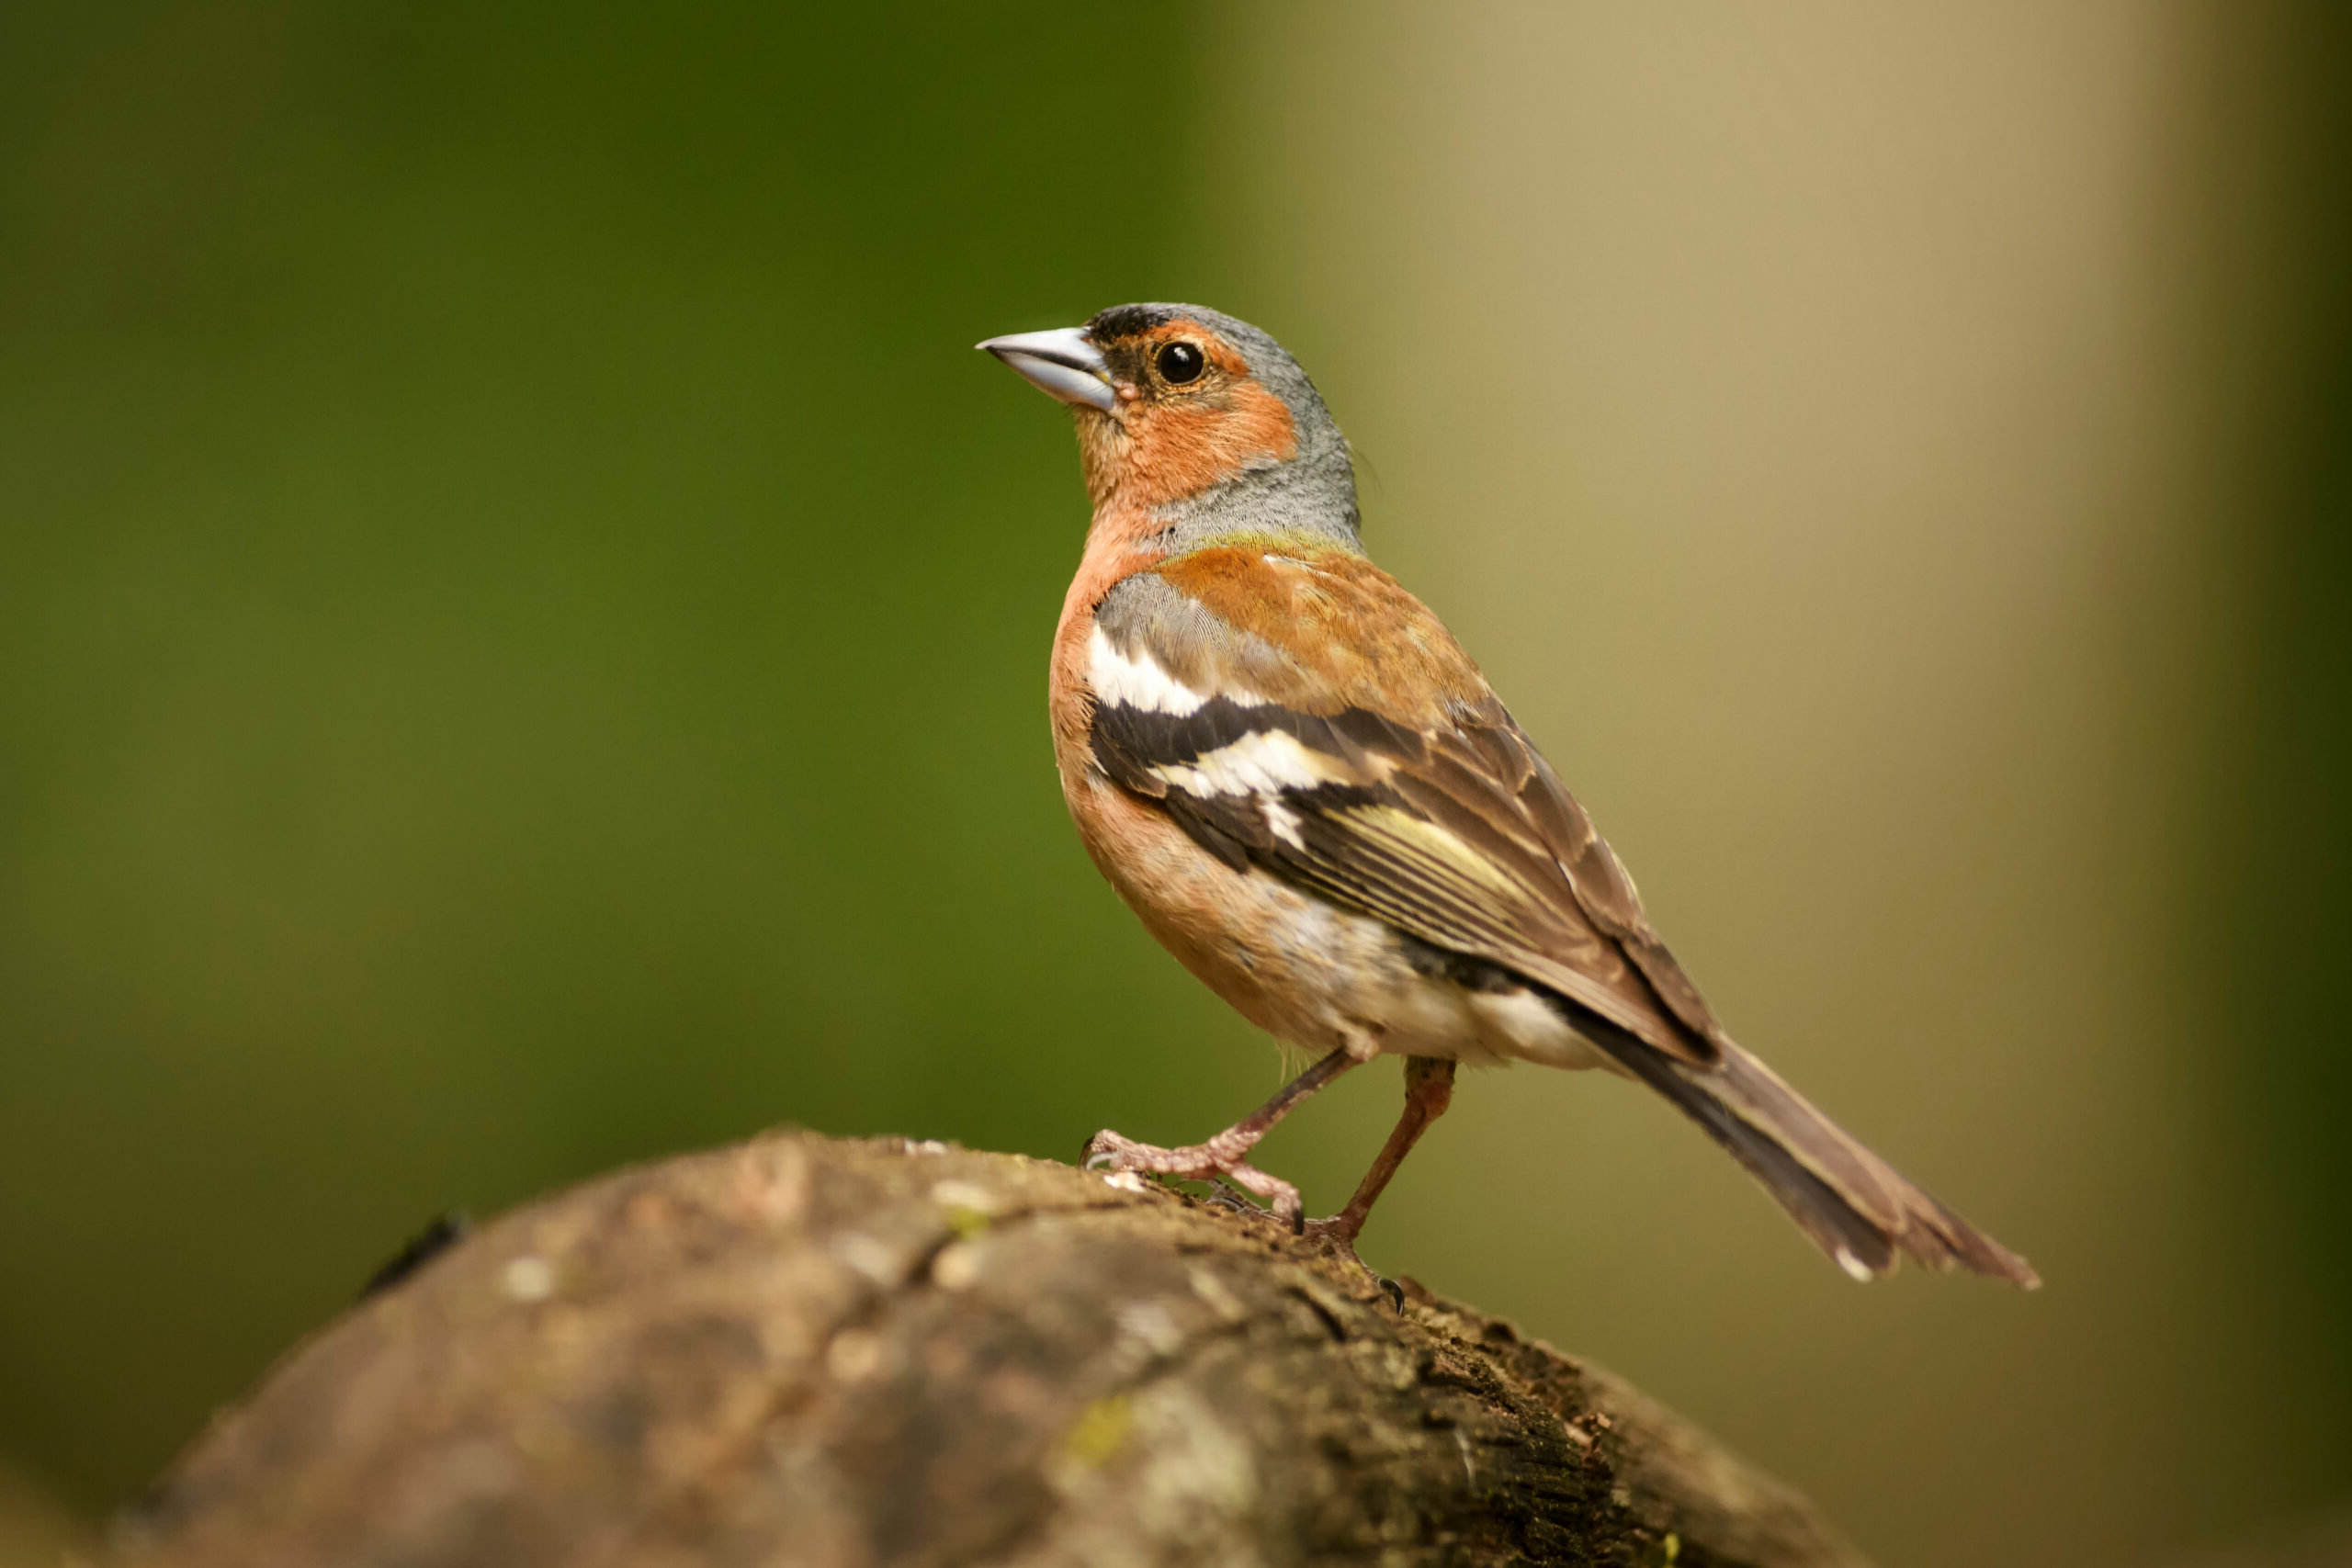 mmon Chaffinch - Fringilla coelebs, beautiful colored perching bird from Old World forests, Hungary.